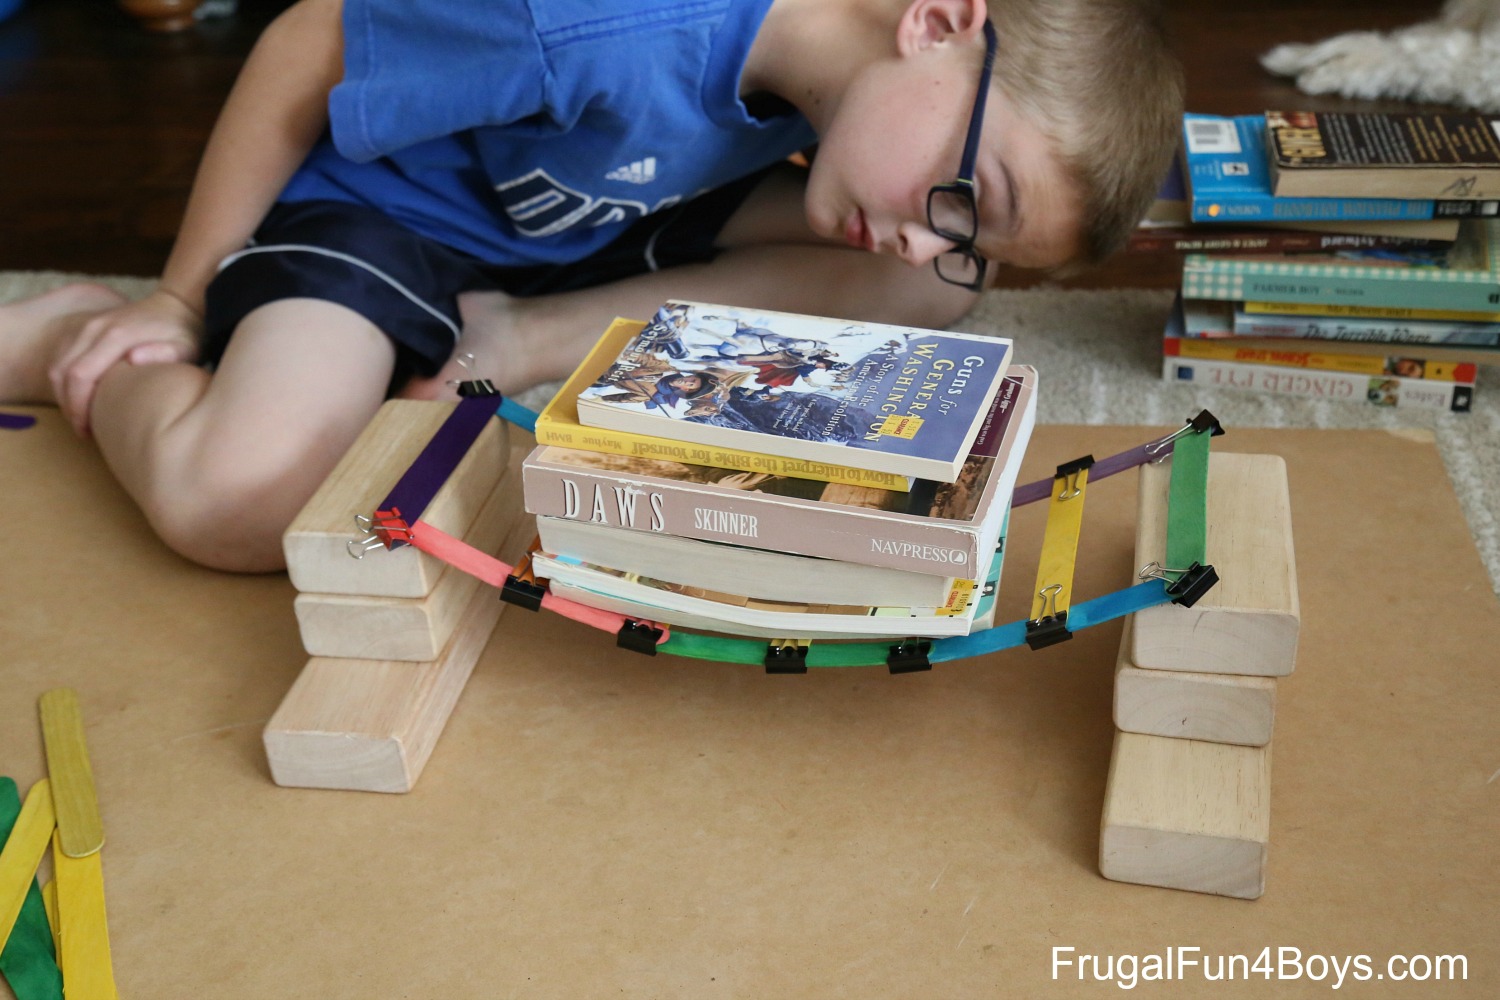 5 Engineering Challenges with Clothespins, Binder Clips, and Craft